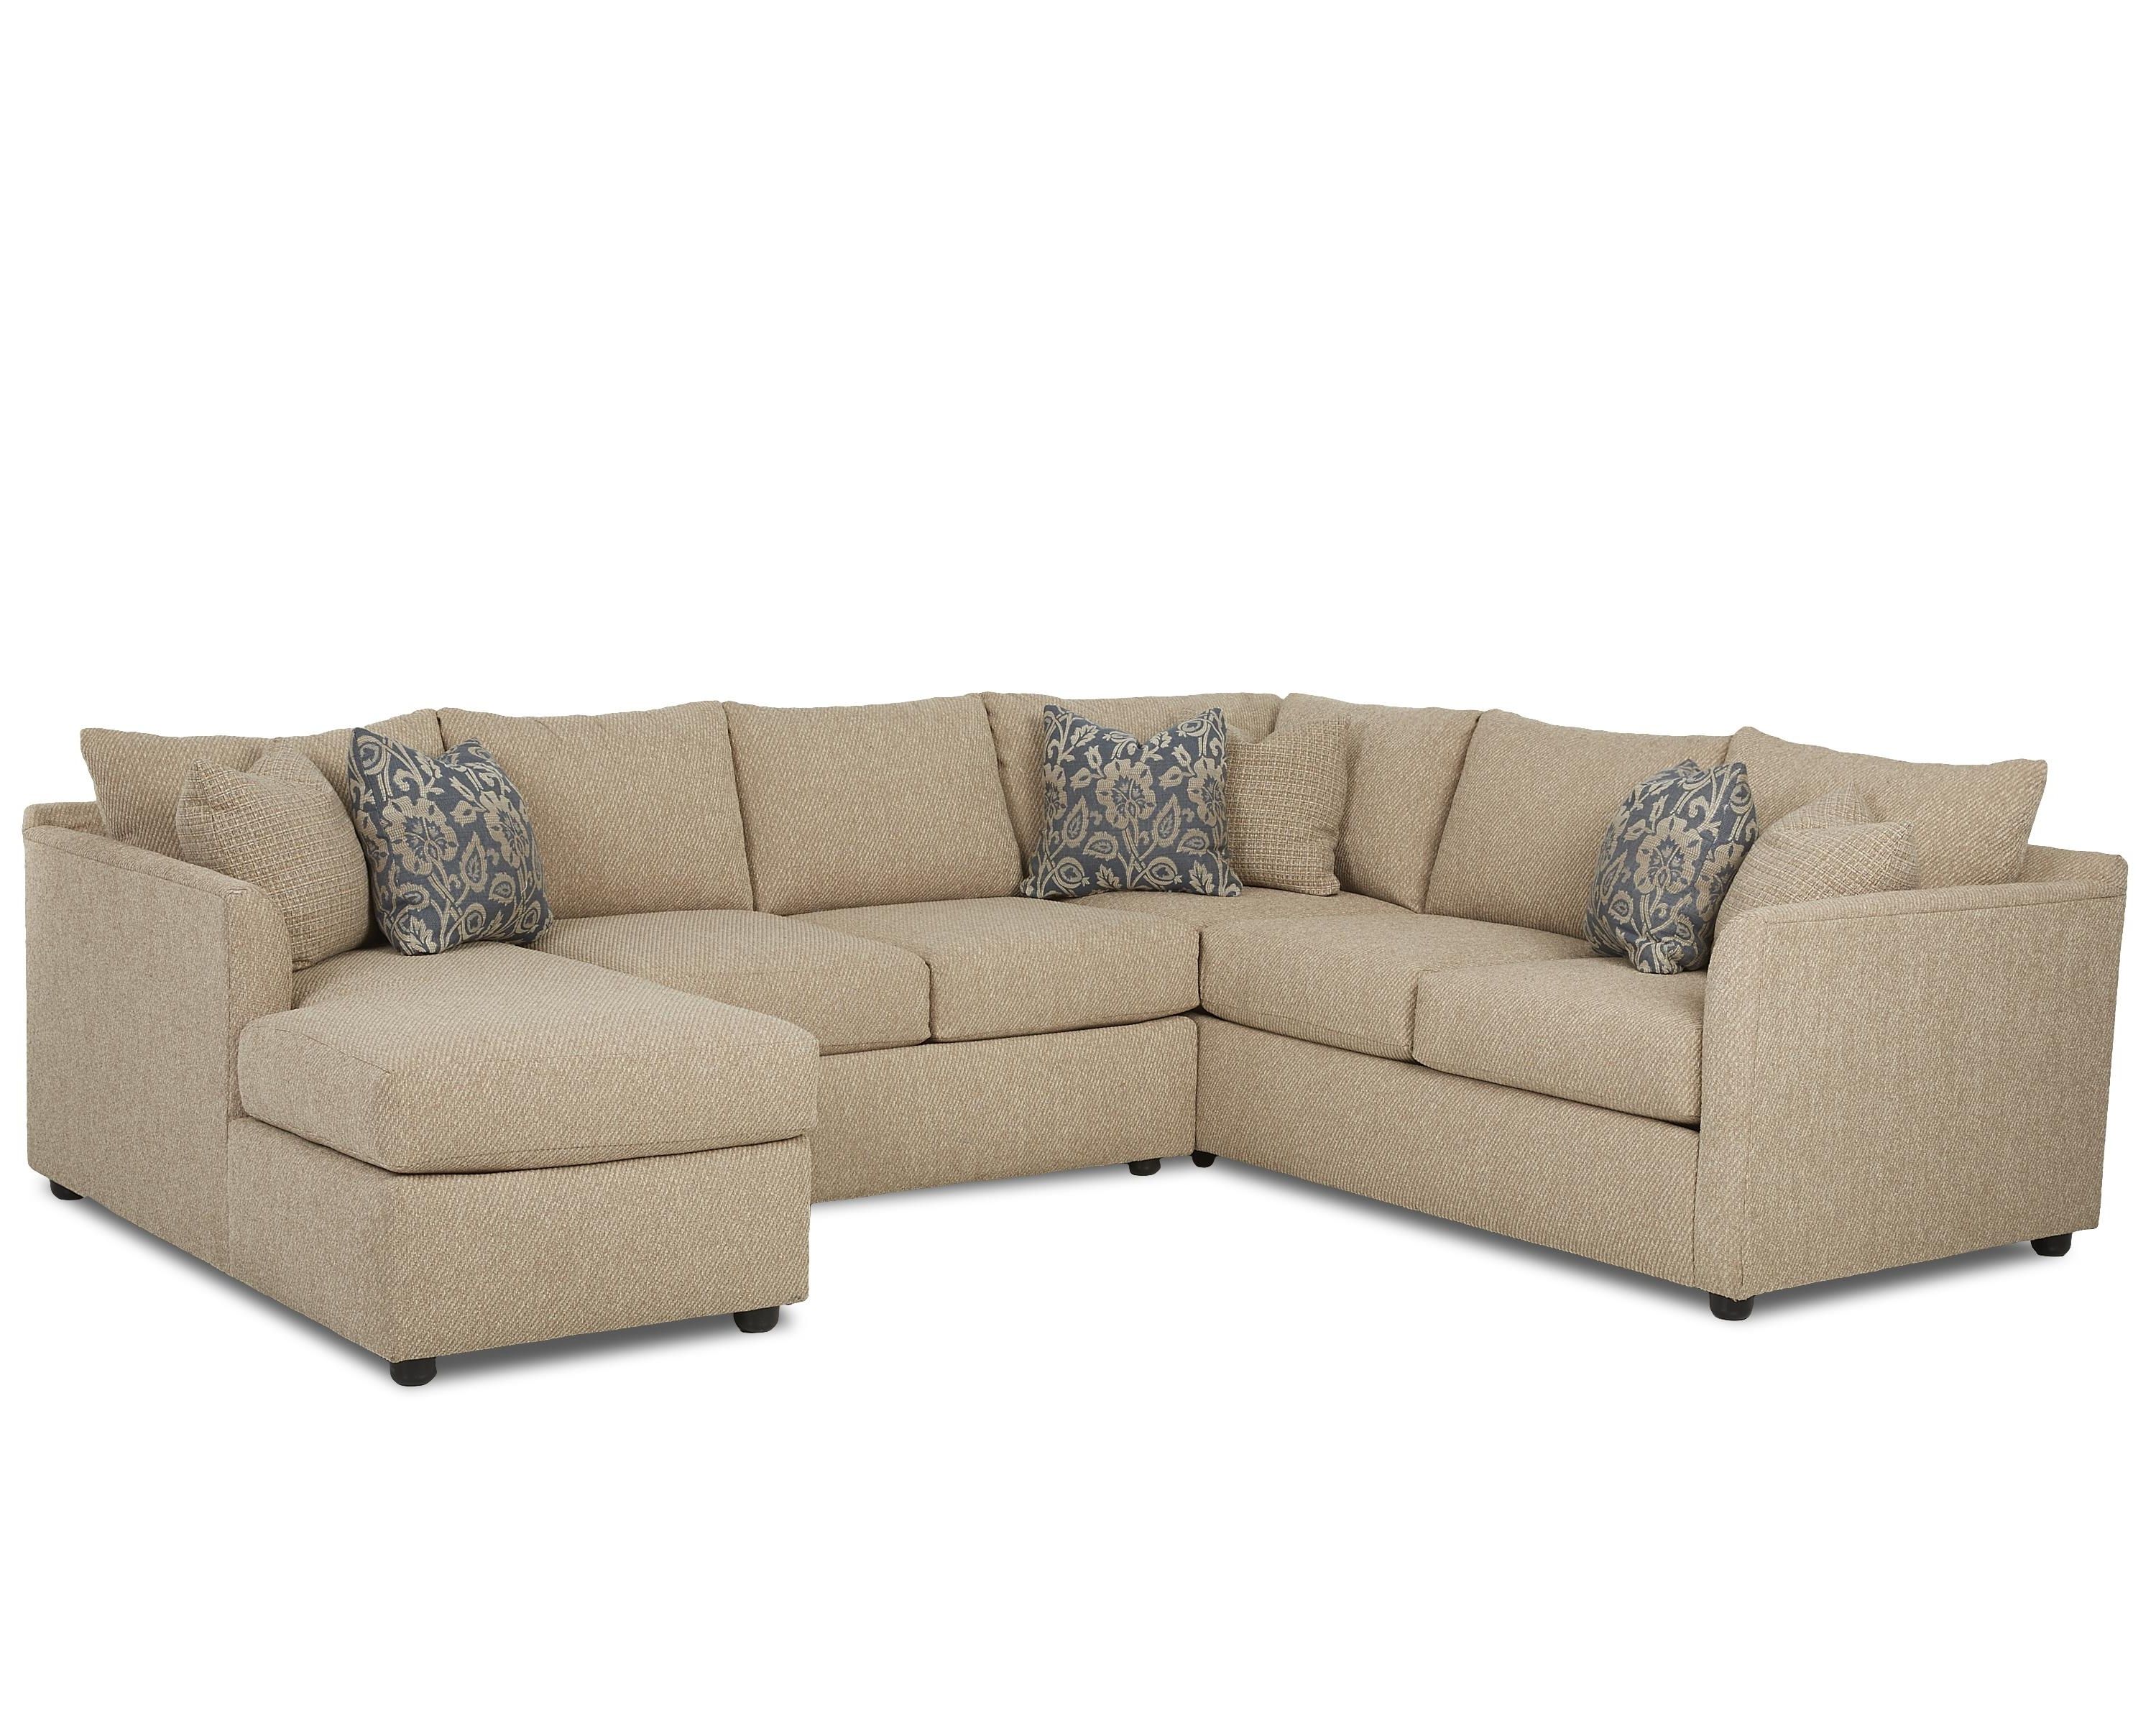 Popular Sectional Sofas At Atlanta Pertaining To Transitional Sectional Sofa With Chaisetrisha Yearwood Home (View 8 of 20)